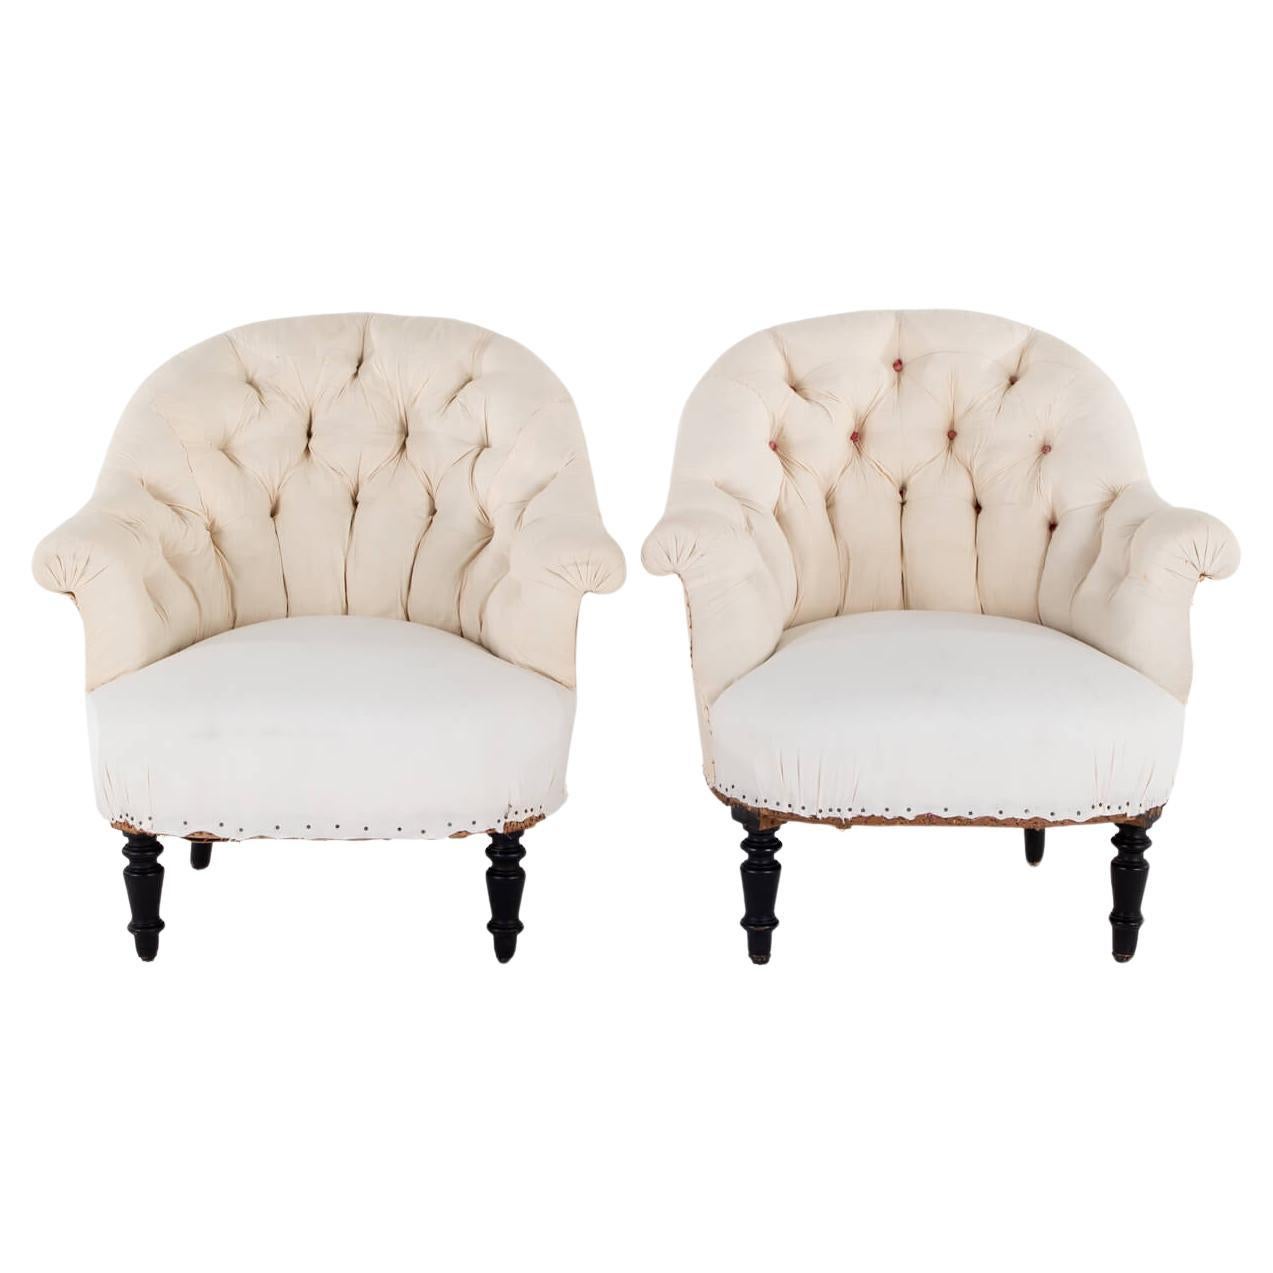 Pair of French Button Back Armchairs